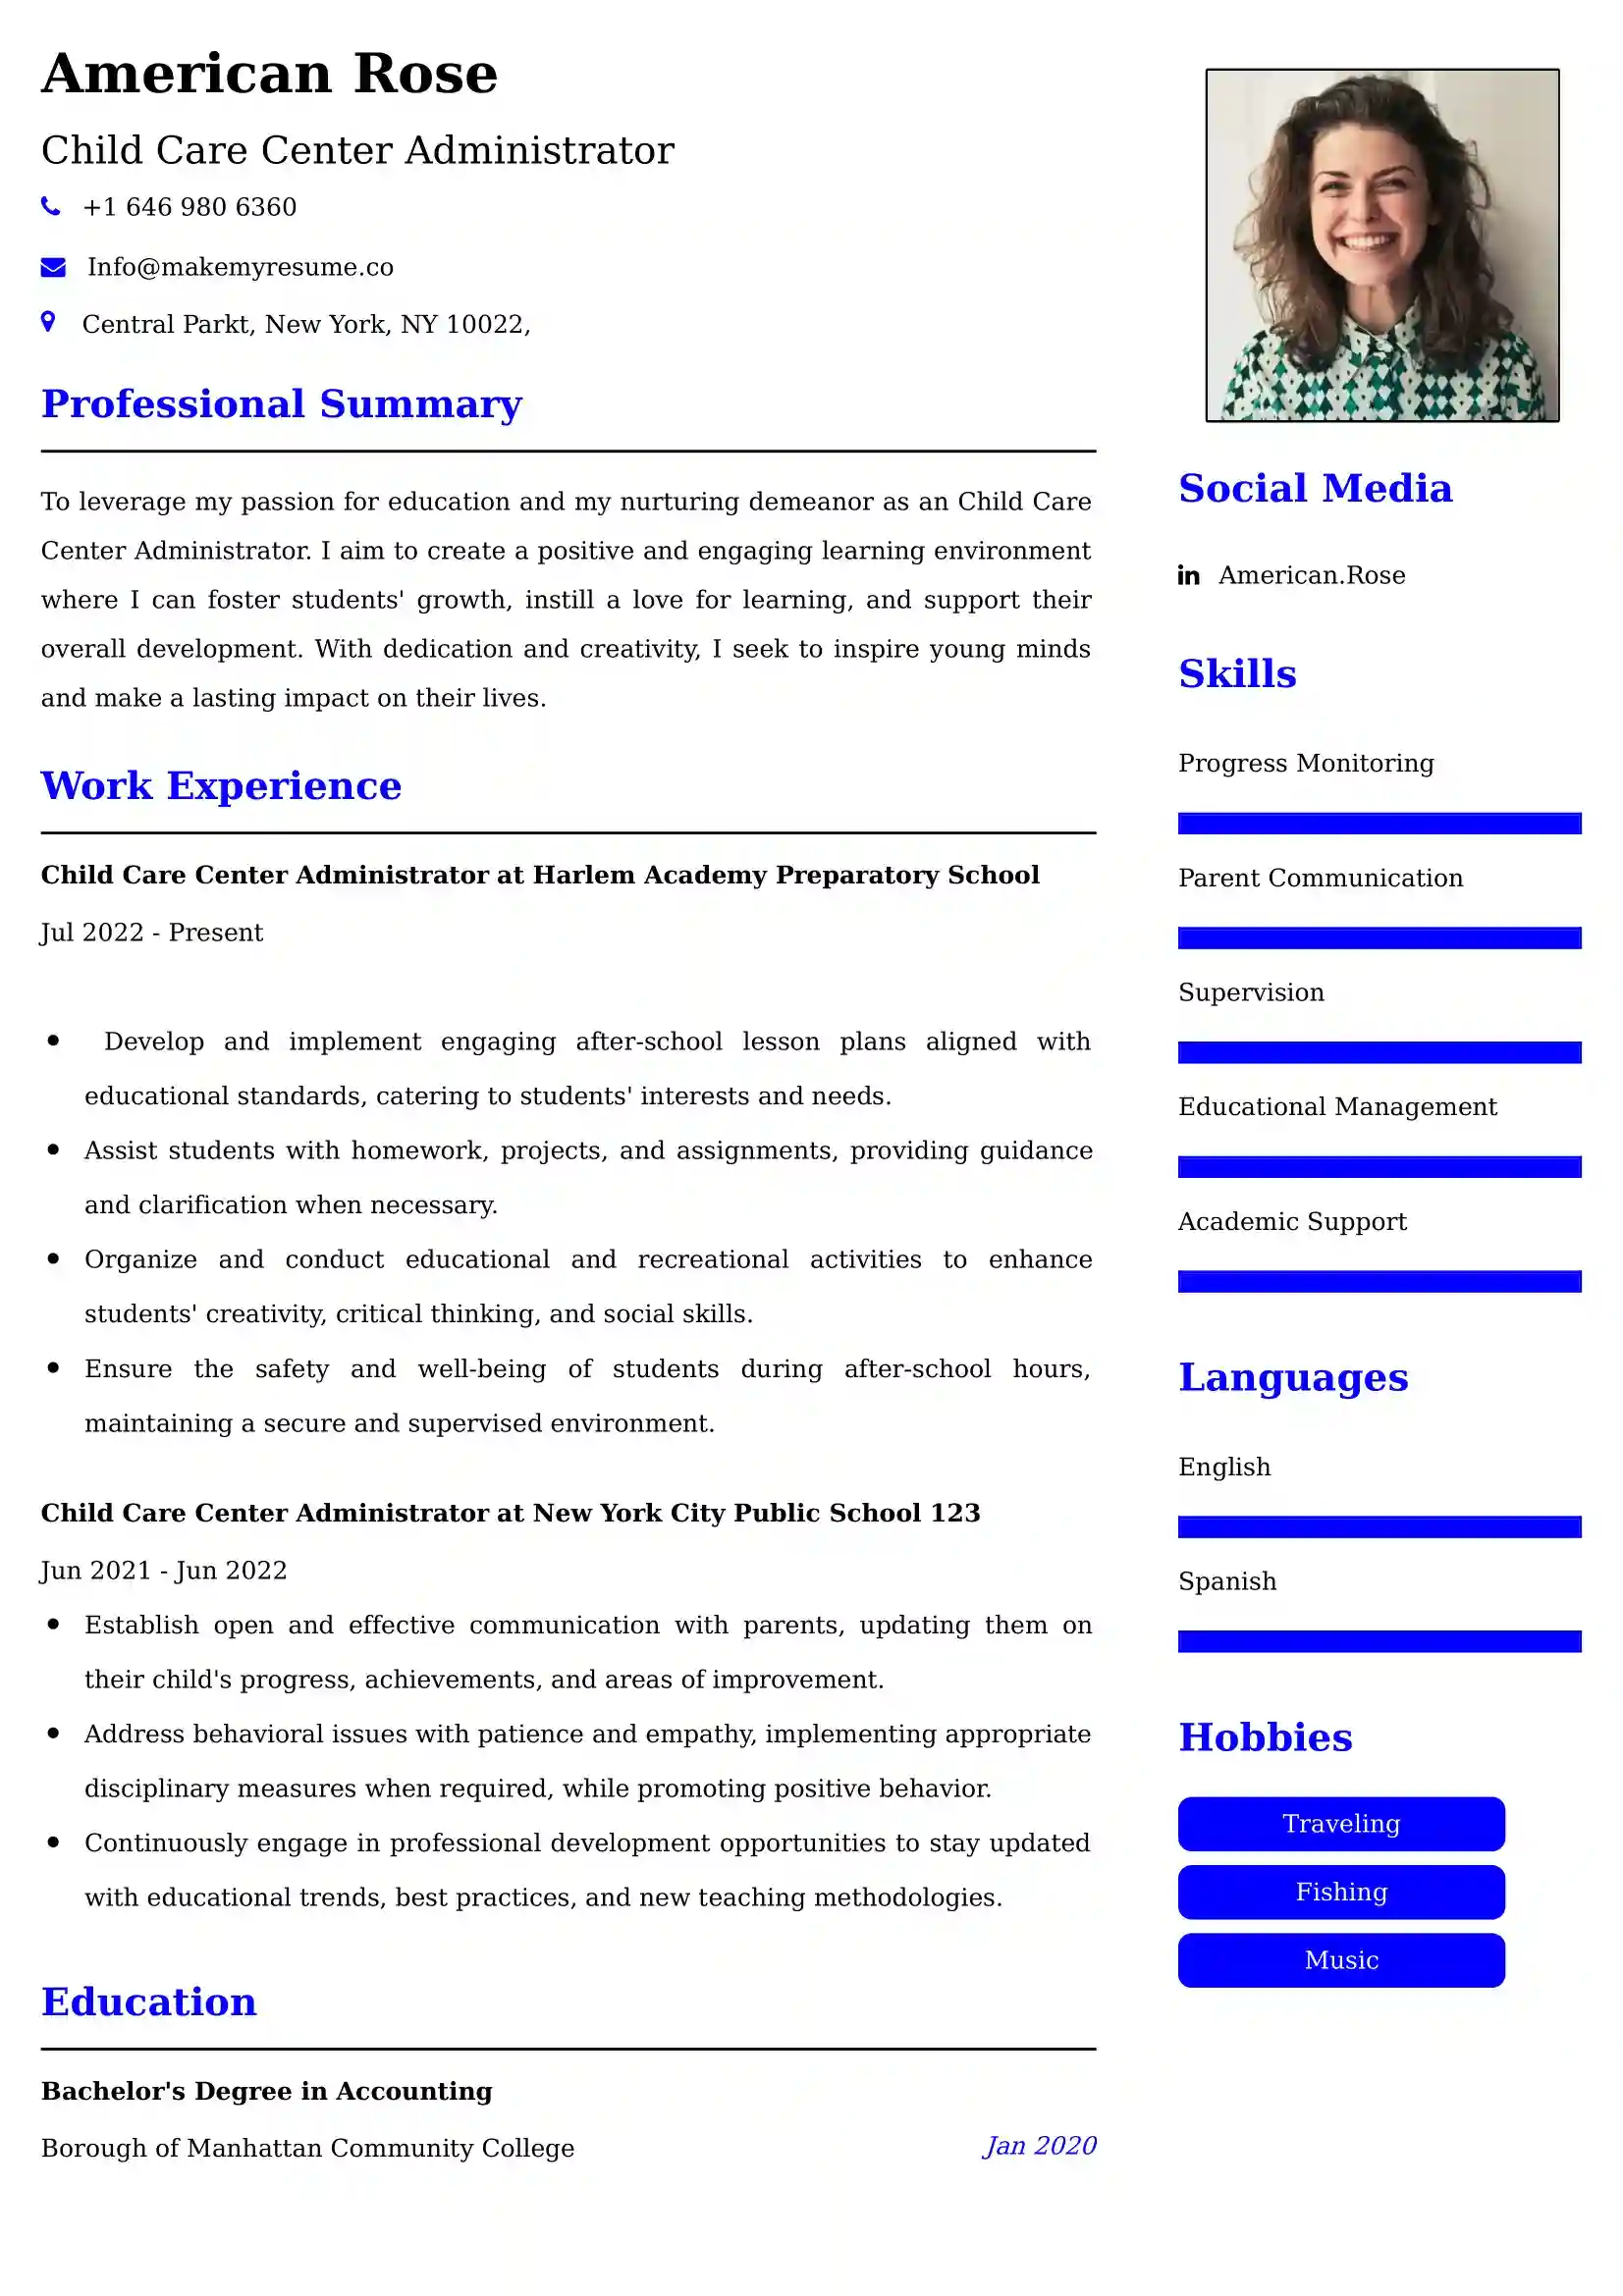 Child Care Center Administrator Resume Examples - Australian Format and Tips